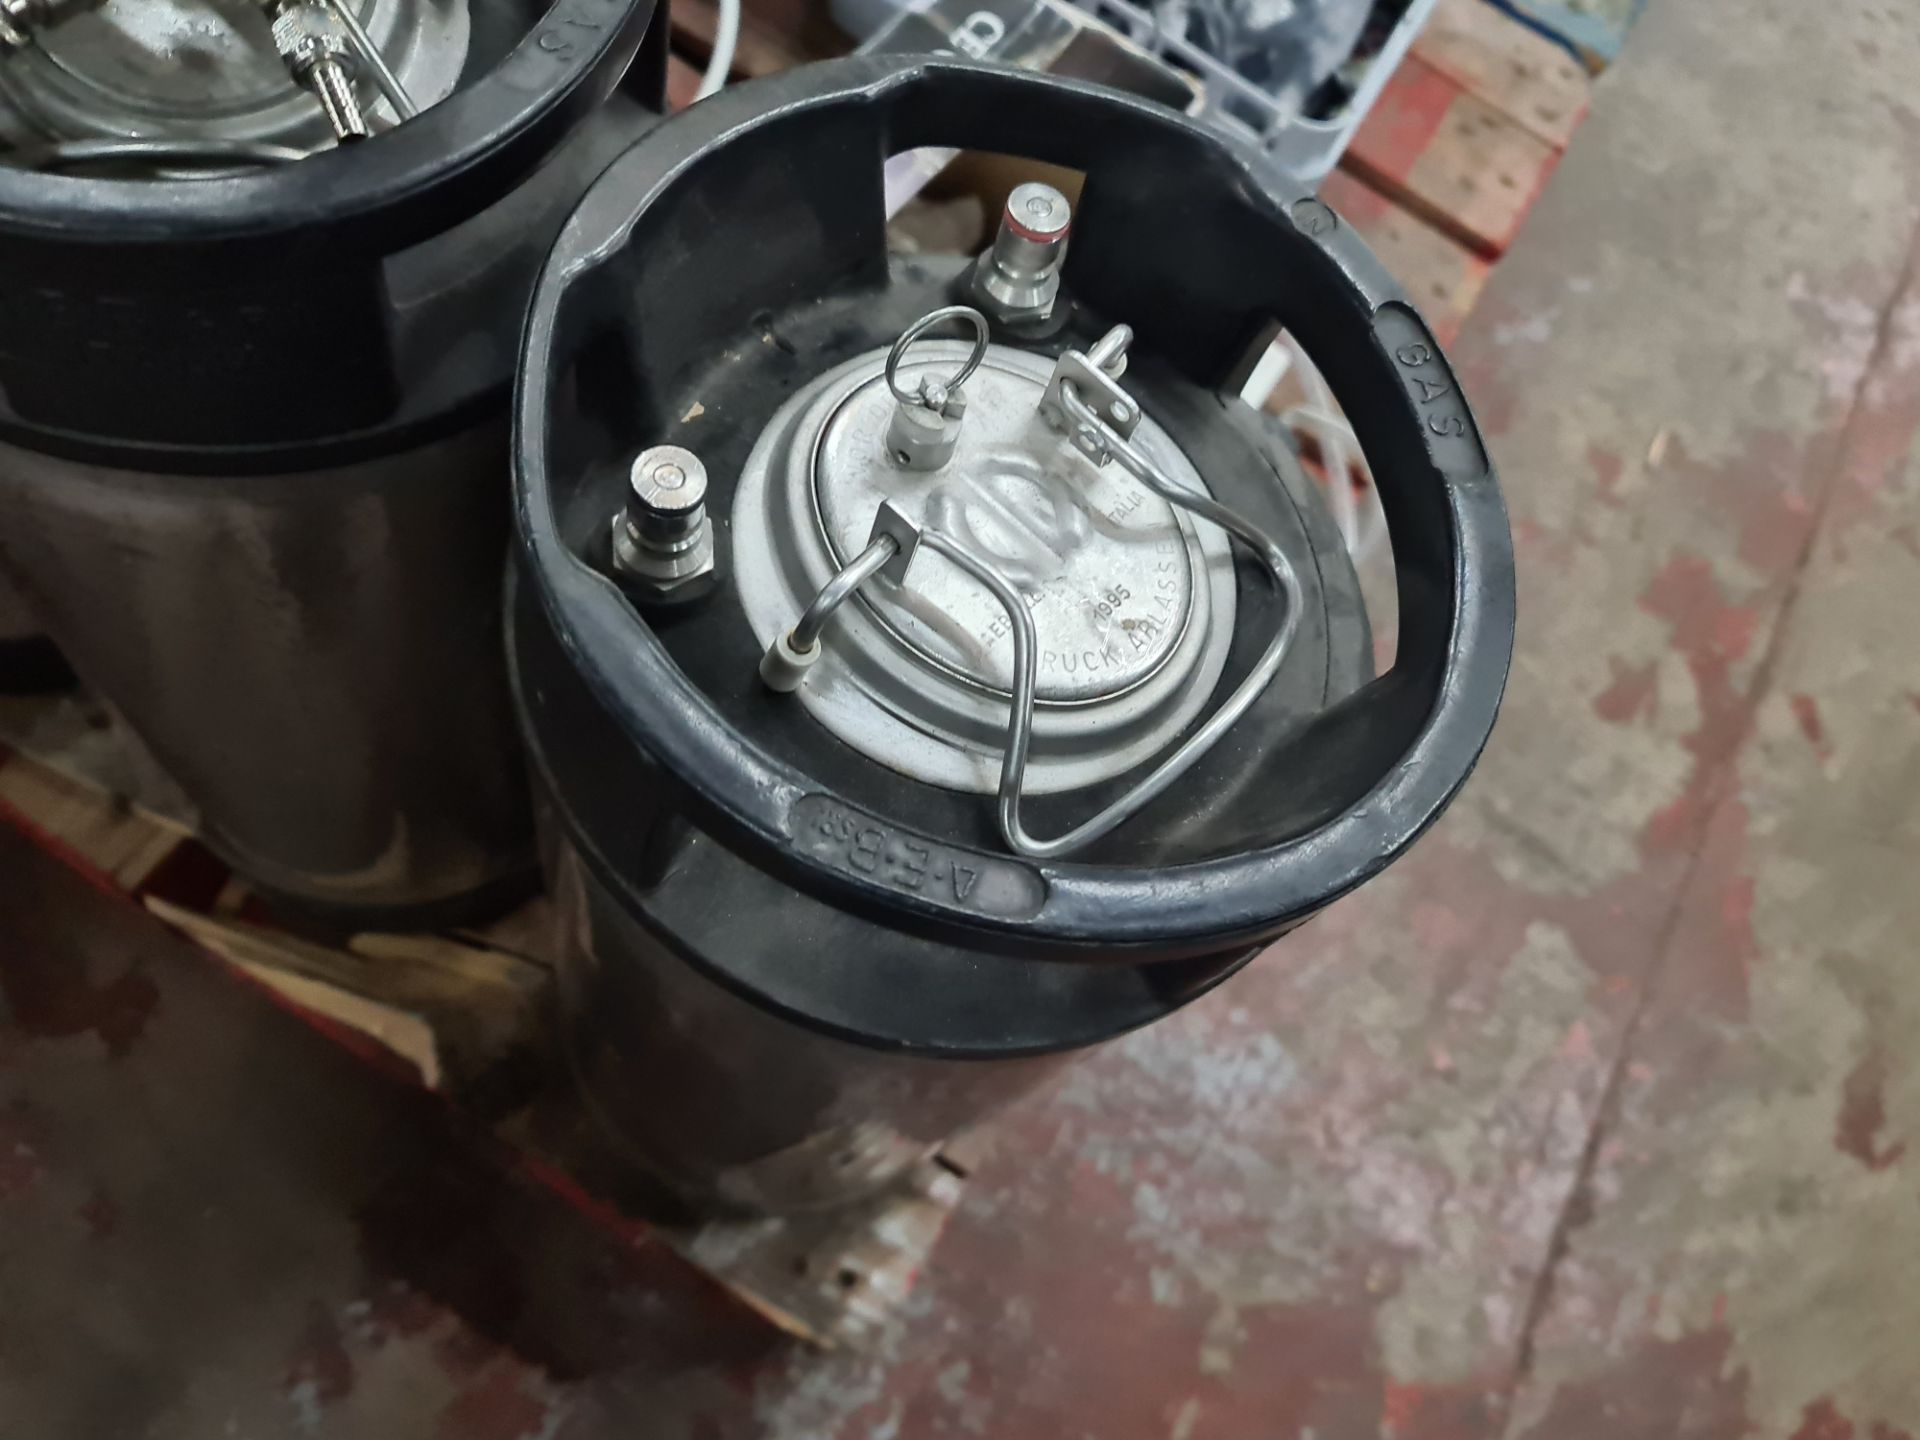 4 off pressurised cannisters, three of which appear to be empty and one of which appears to be full, - Image 7 of 7